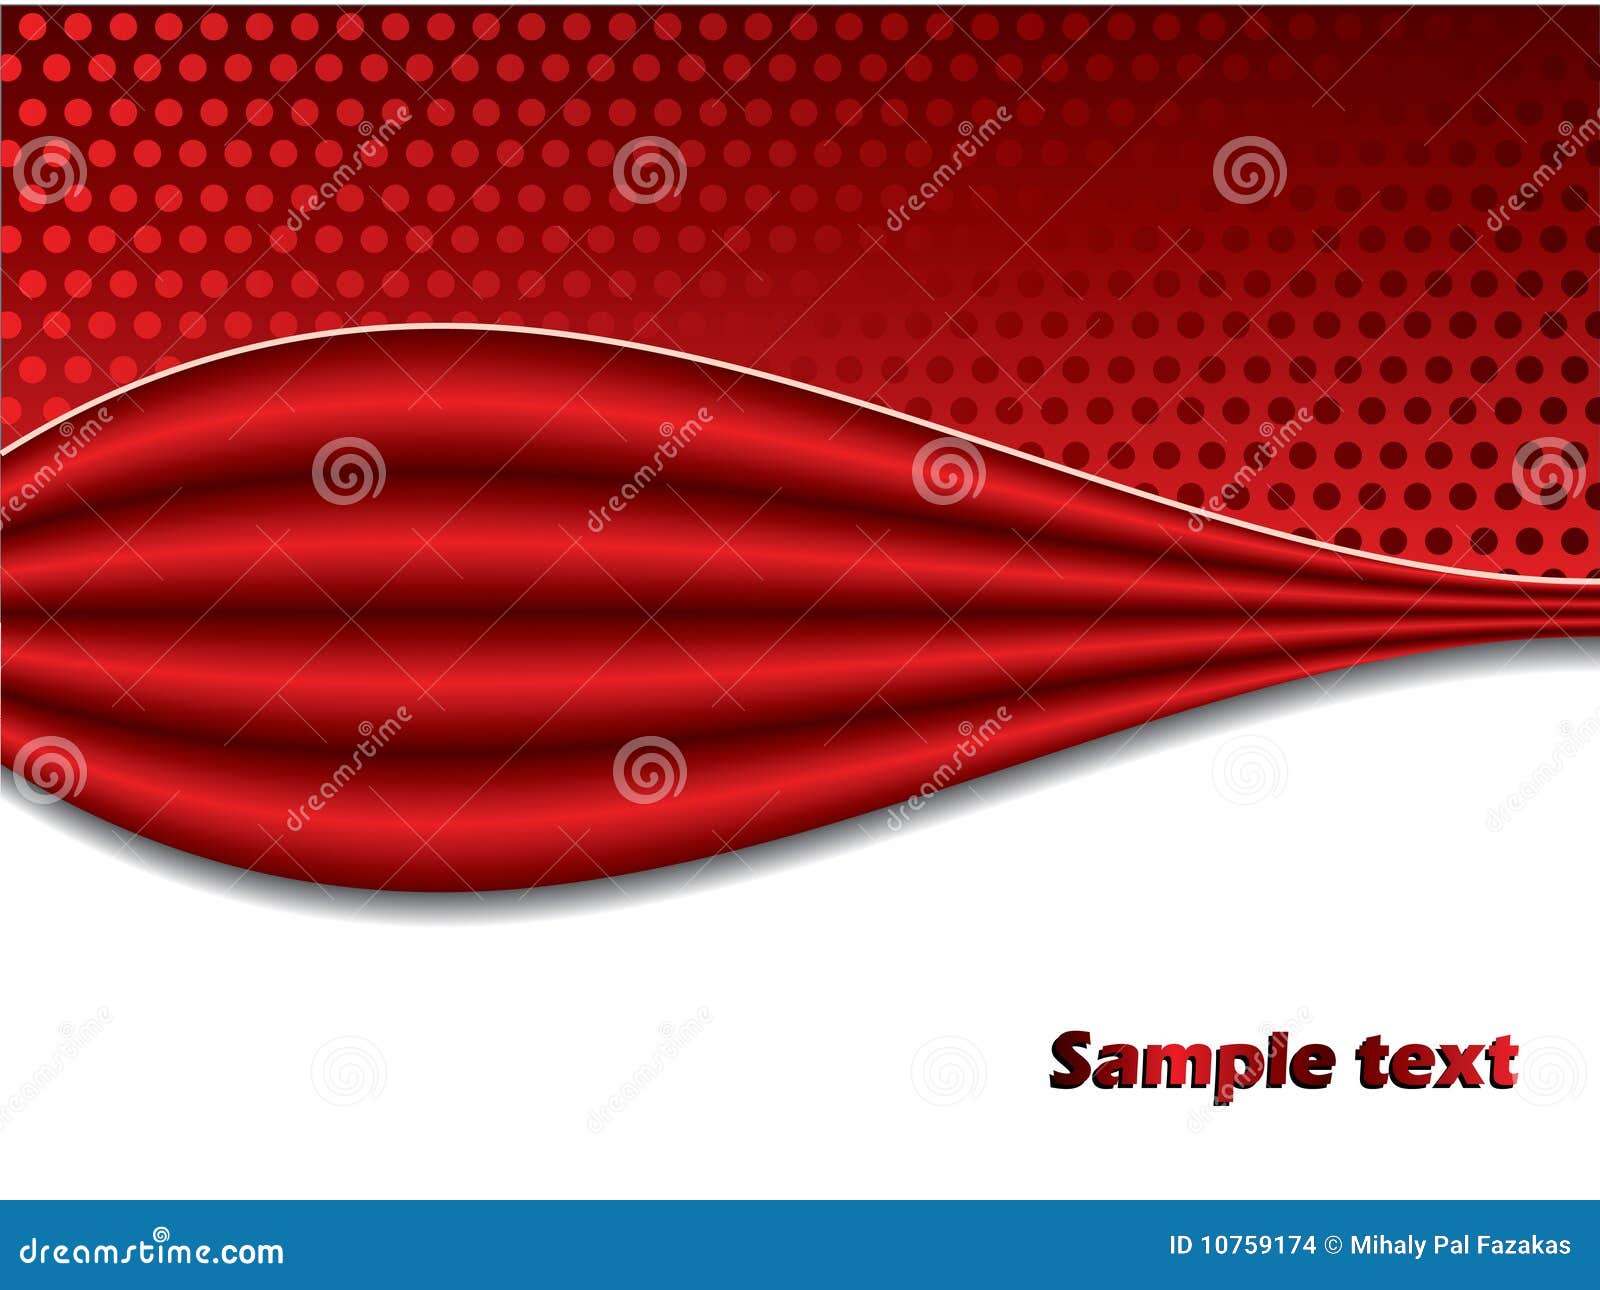 Lines and dots stock vector. Illustration of cool, decorative - 10759174